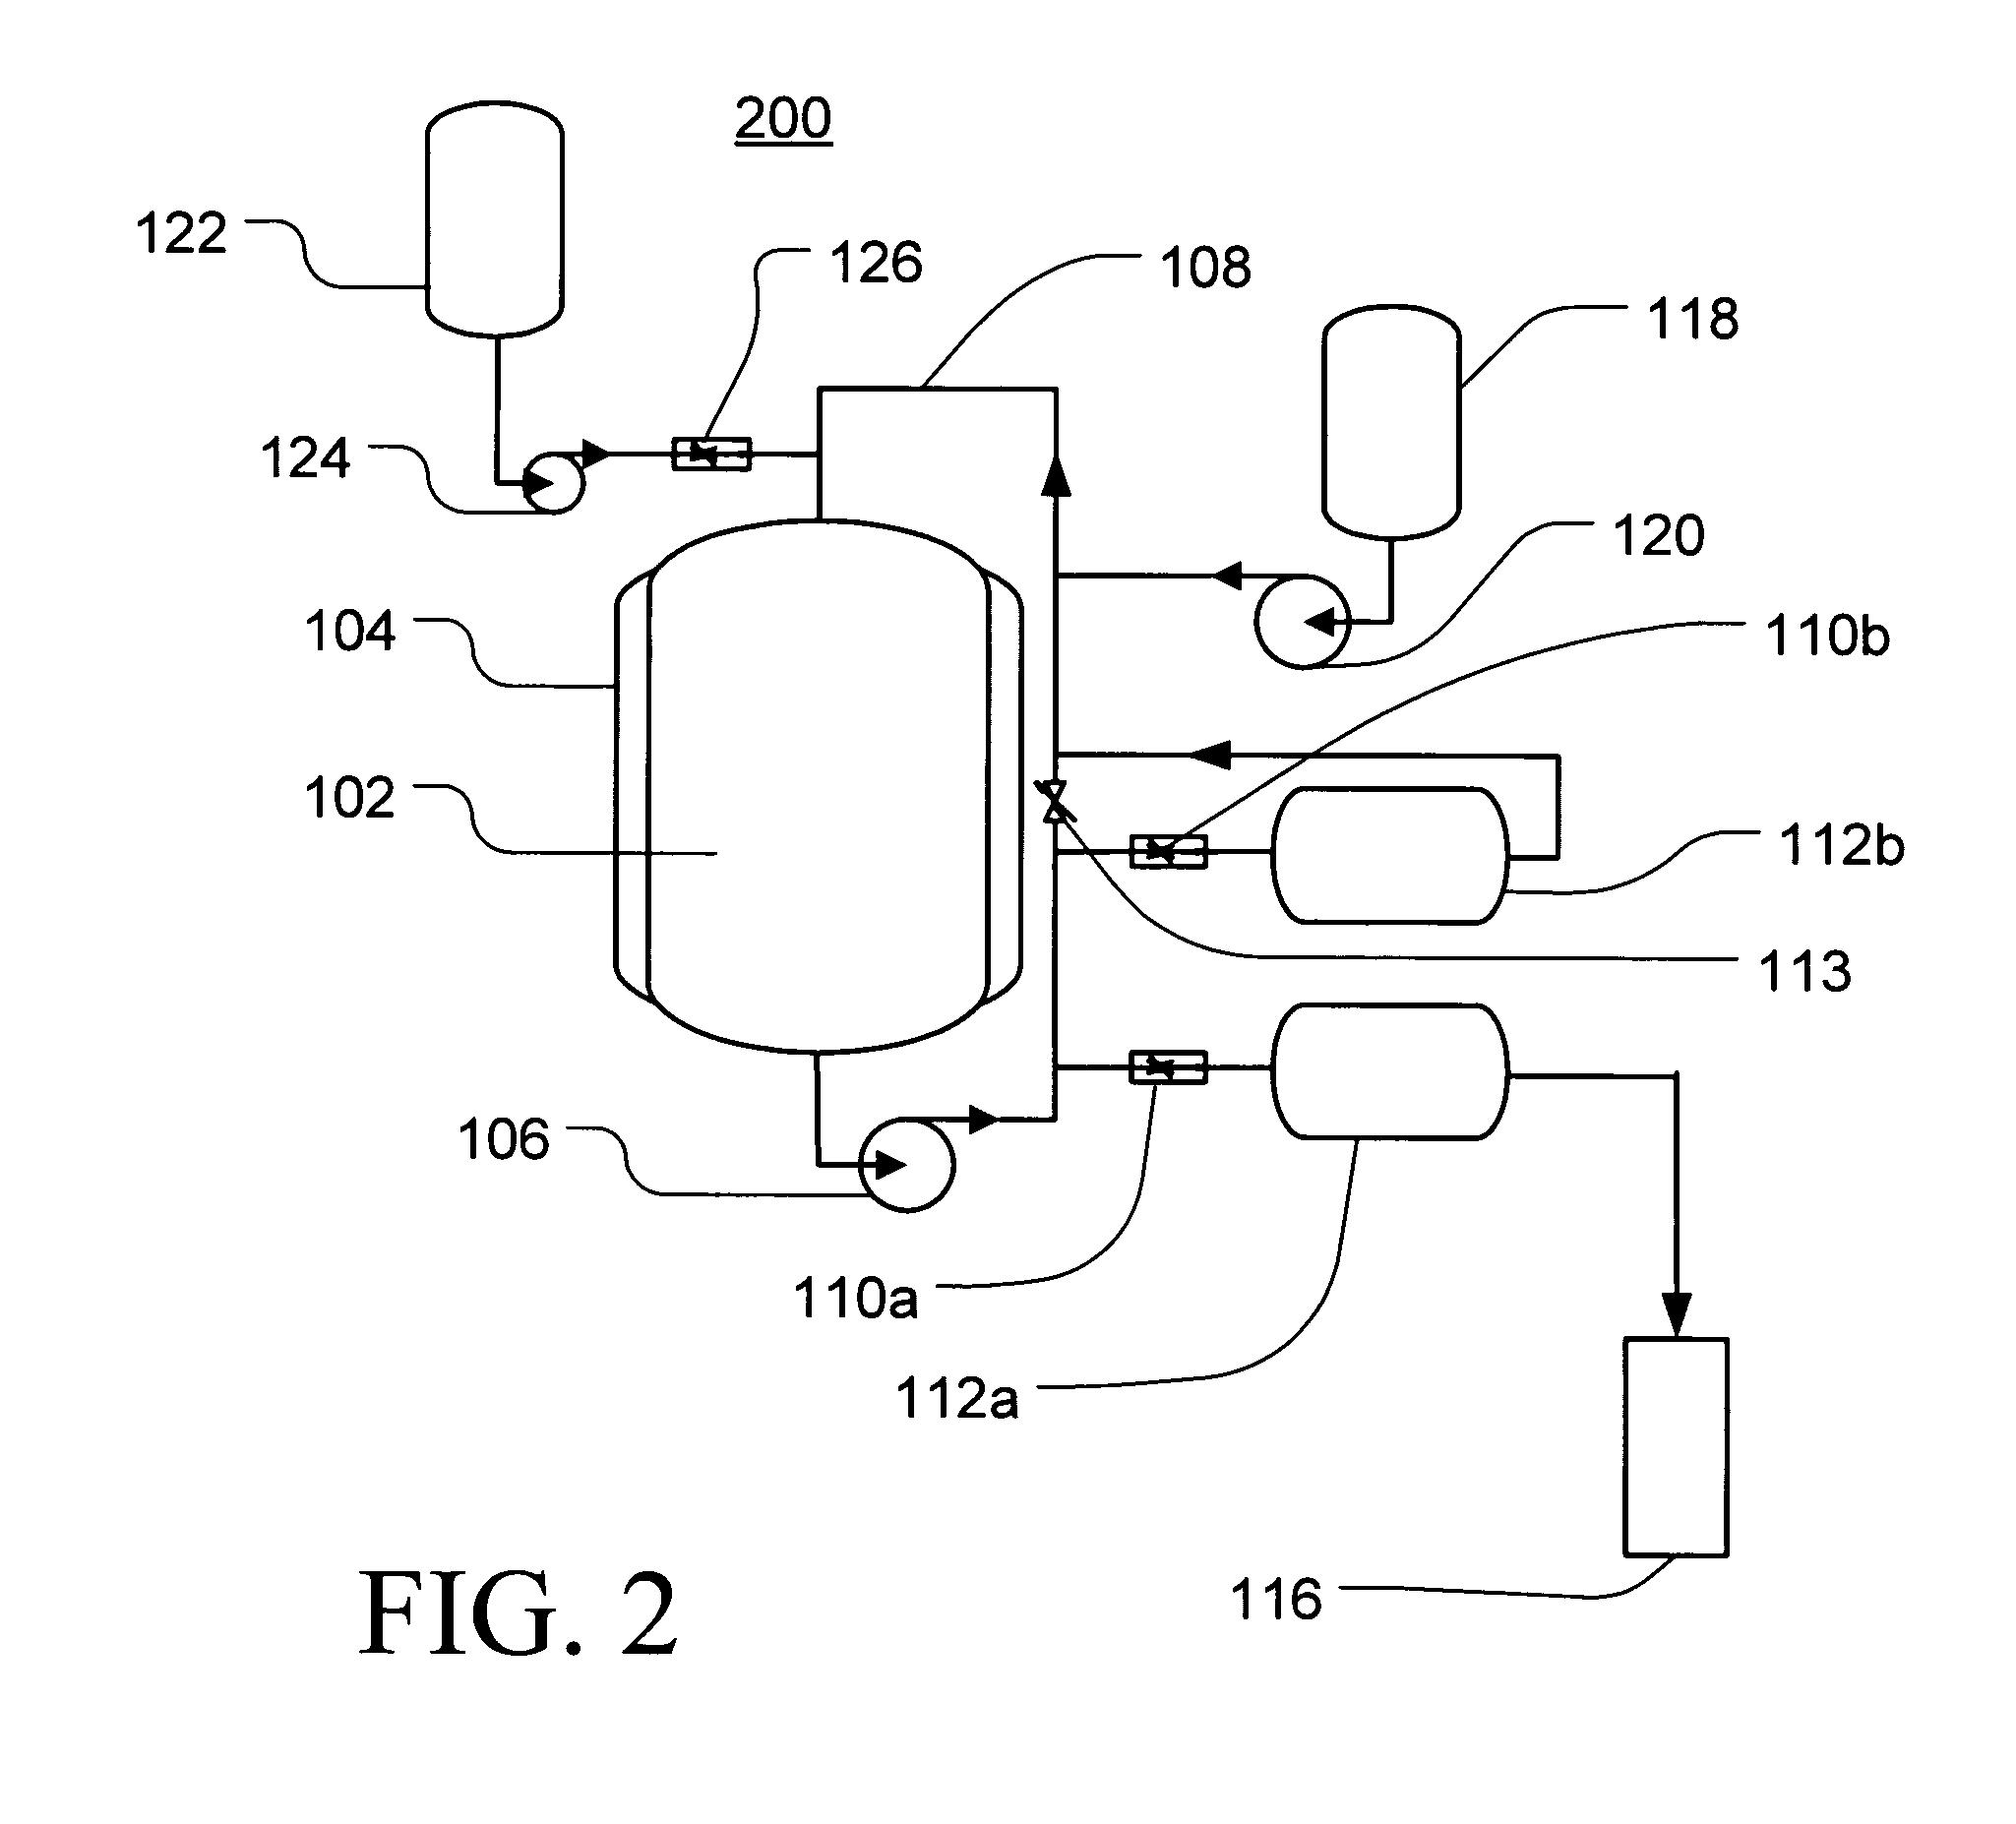 Method of manufacturing nanoparticles